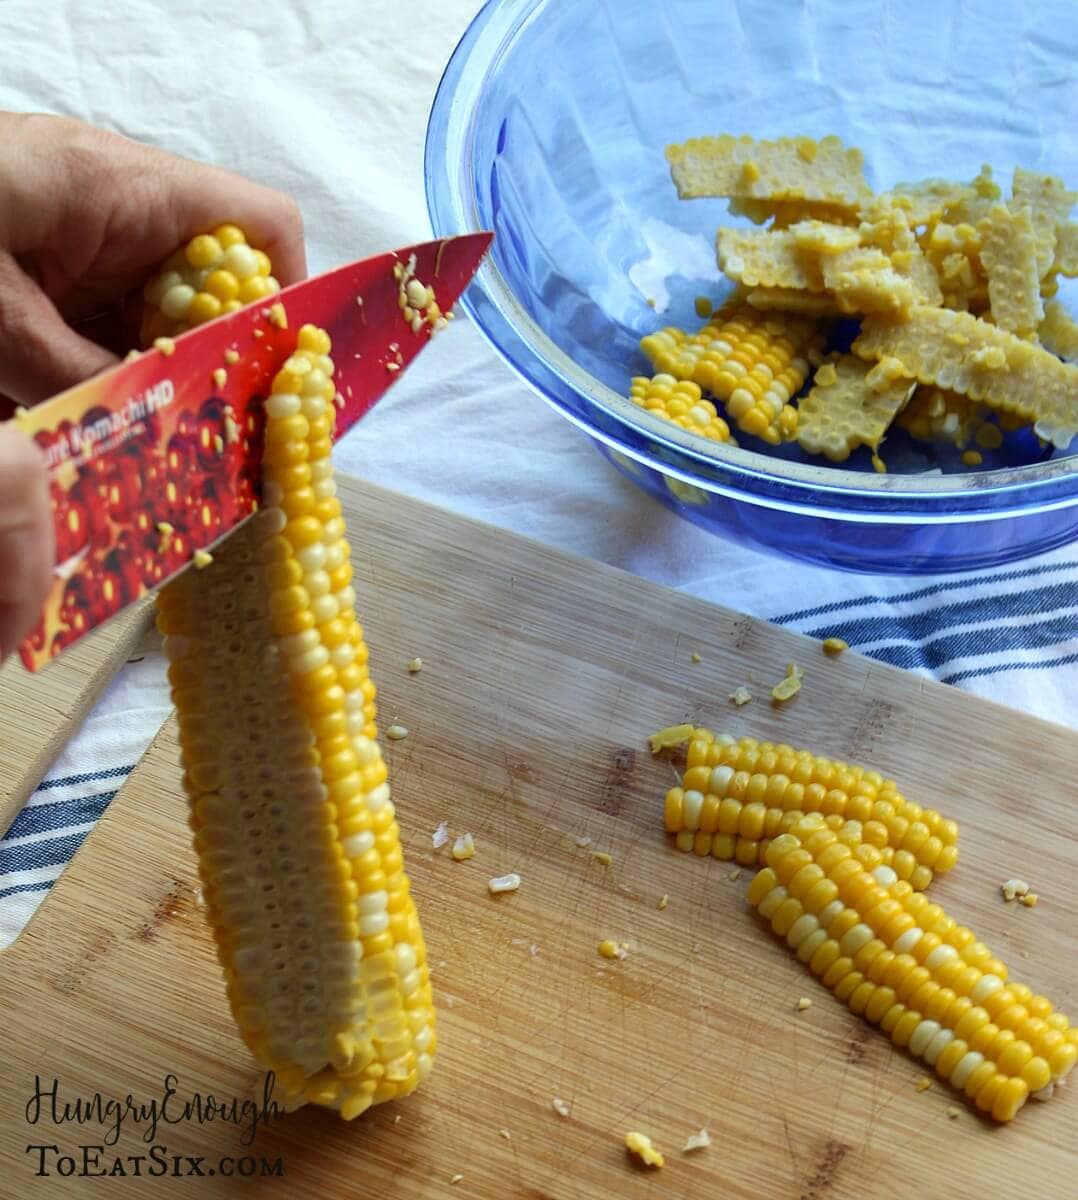 Image of an ear of corn with a knife slicing off the kernels